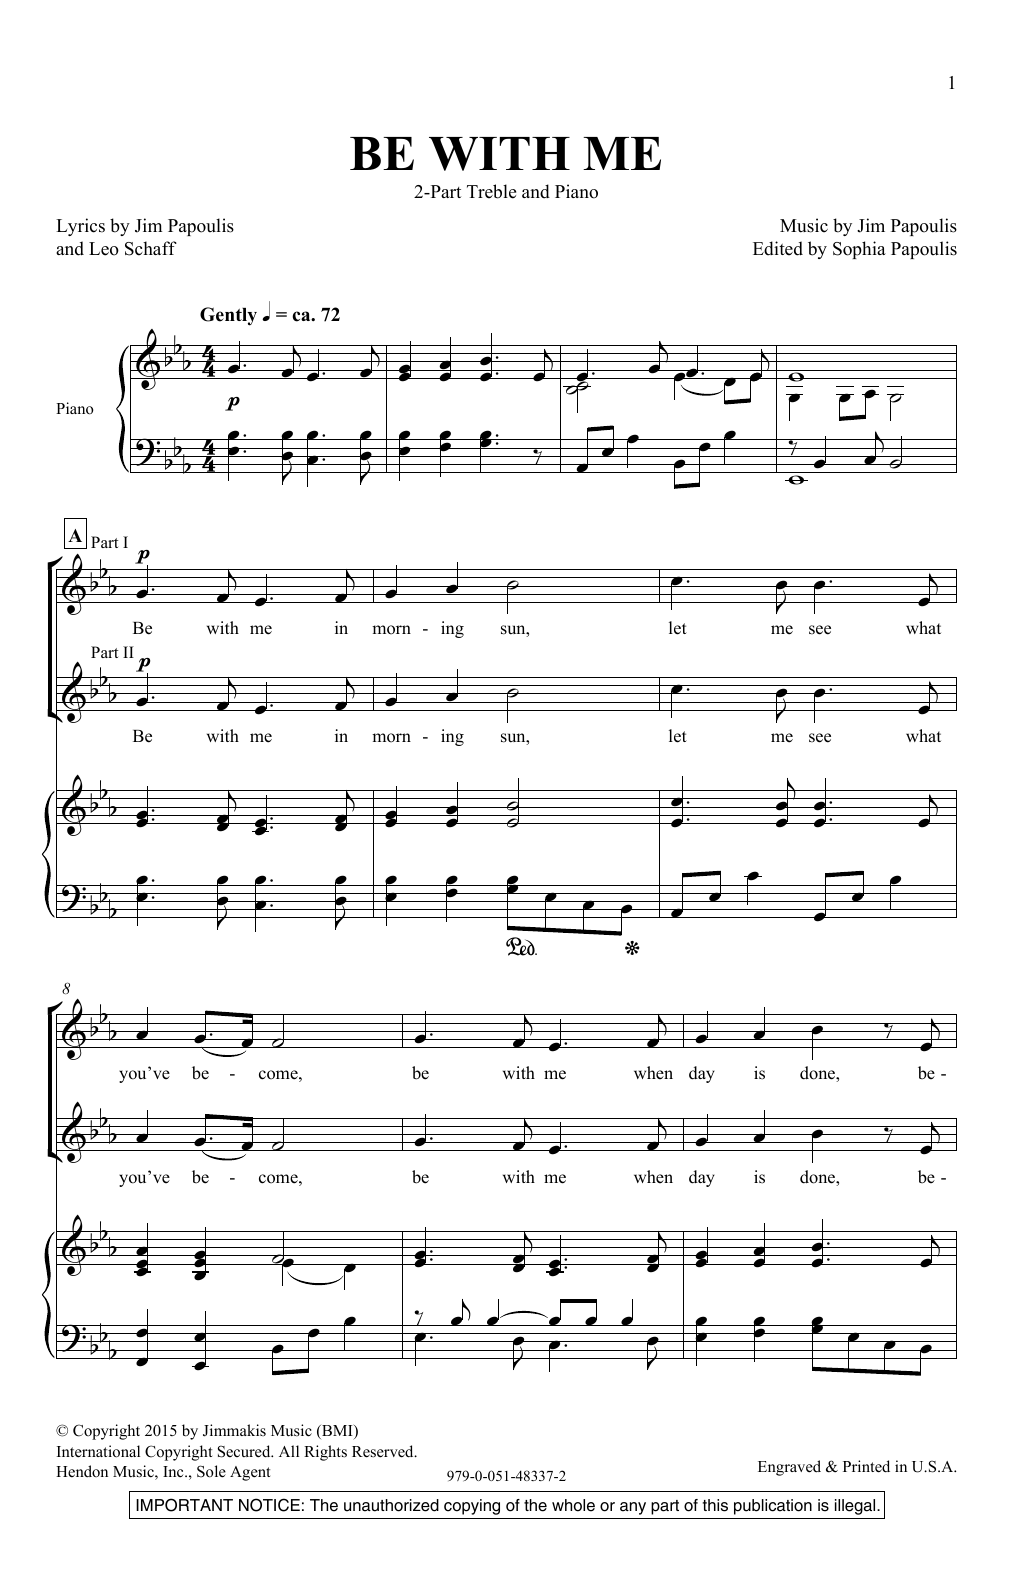 Download Jim Papoulis Be With Me Sheet Music